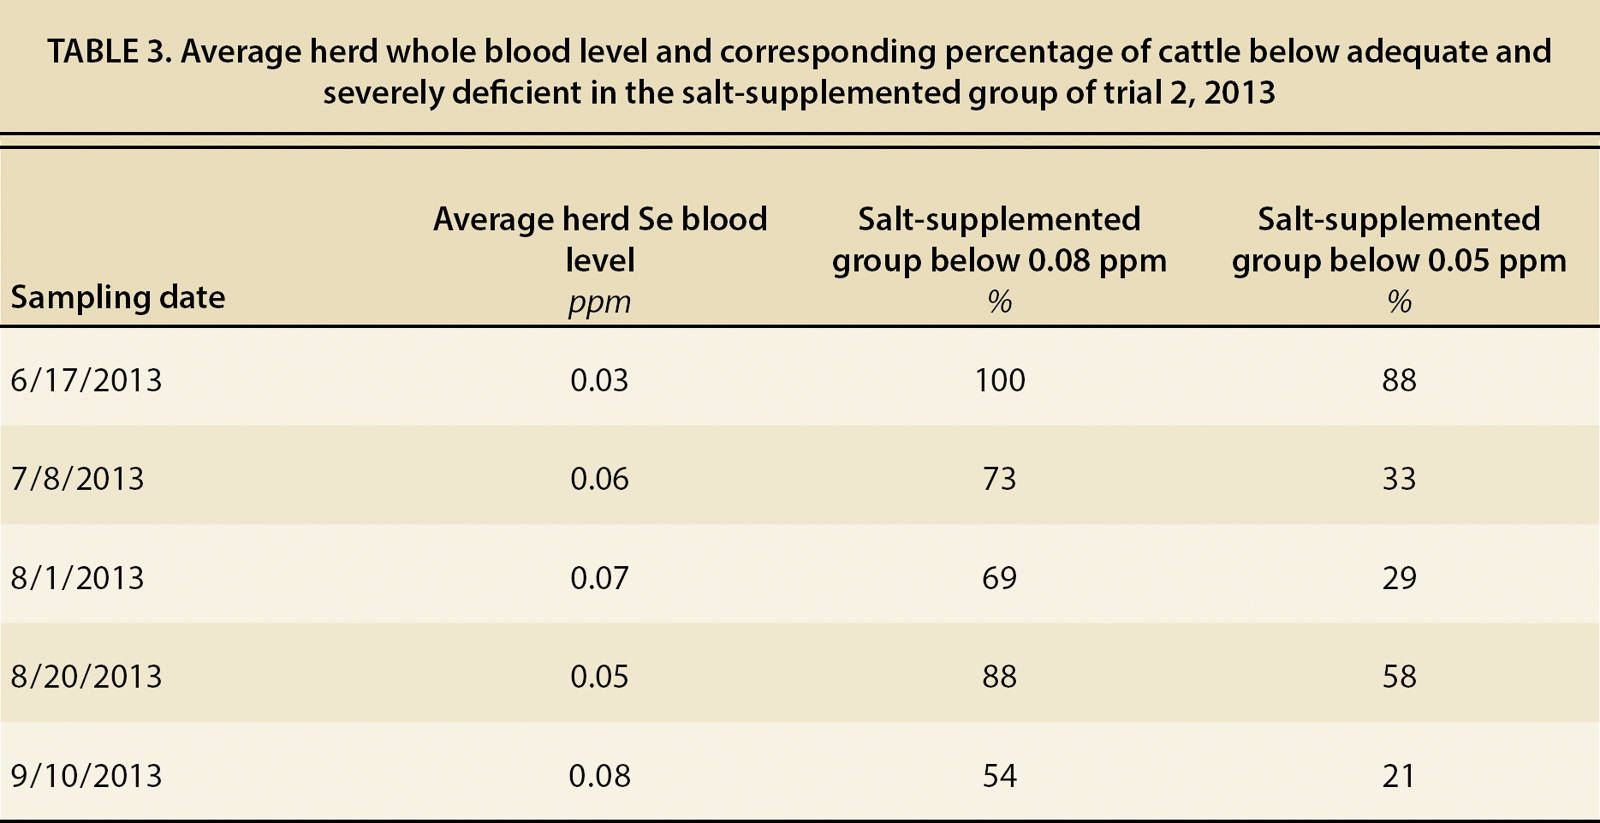 Average herd whole blood level and corresponding percentage of cattle below adequate and severely deficient in the salt-supplemented group of trial 2, 2013